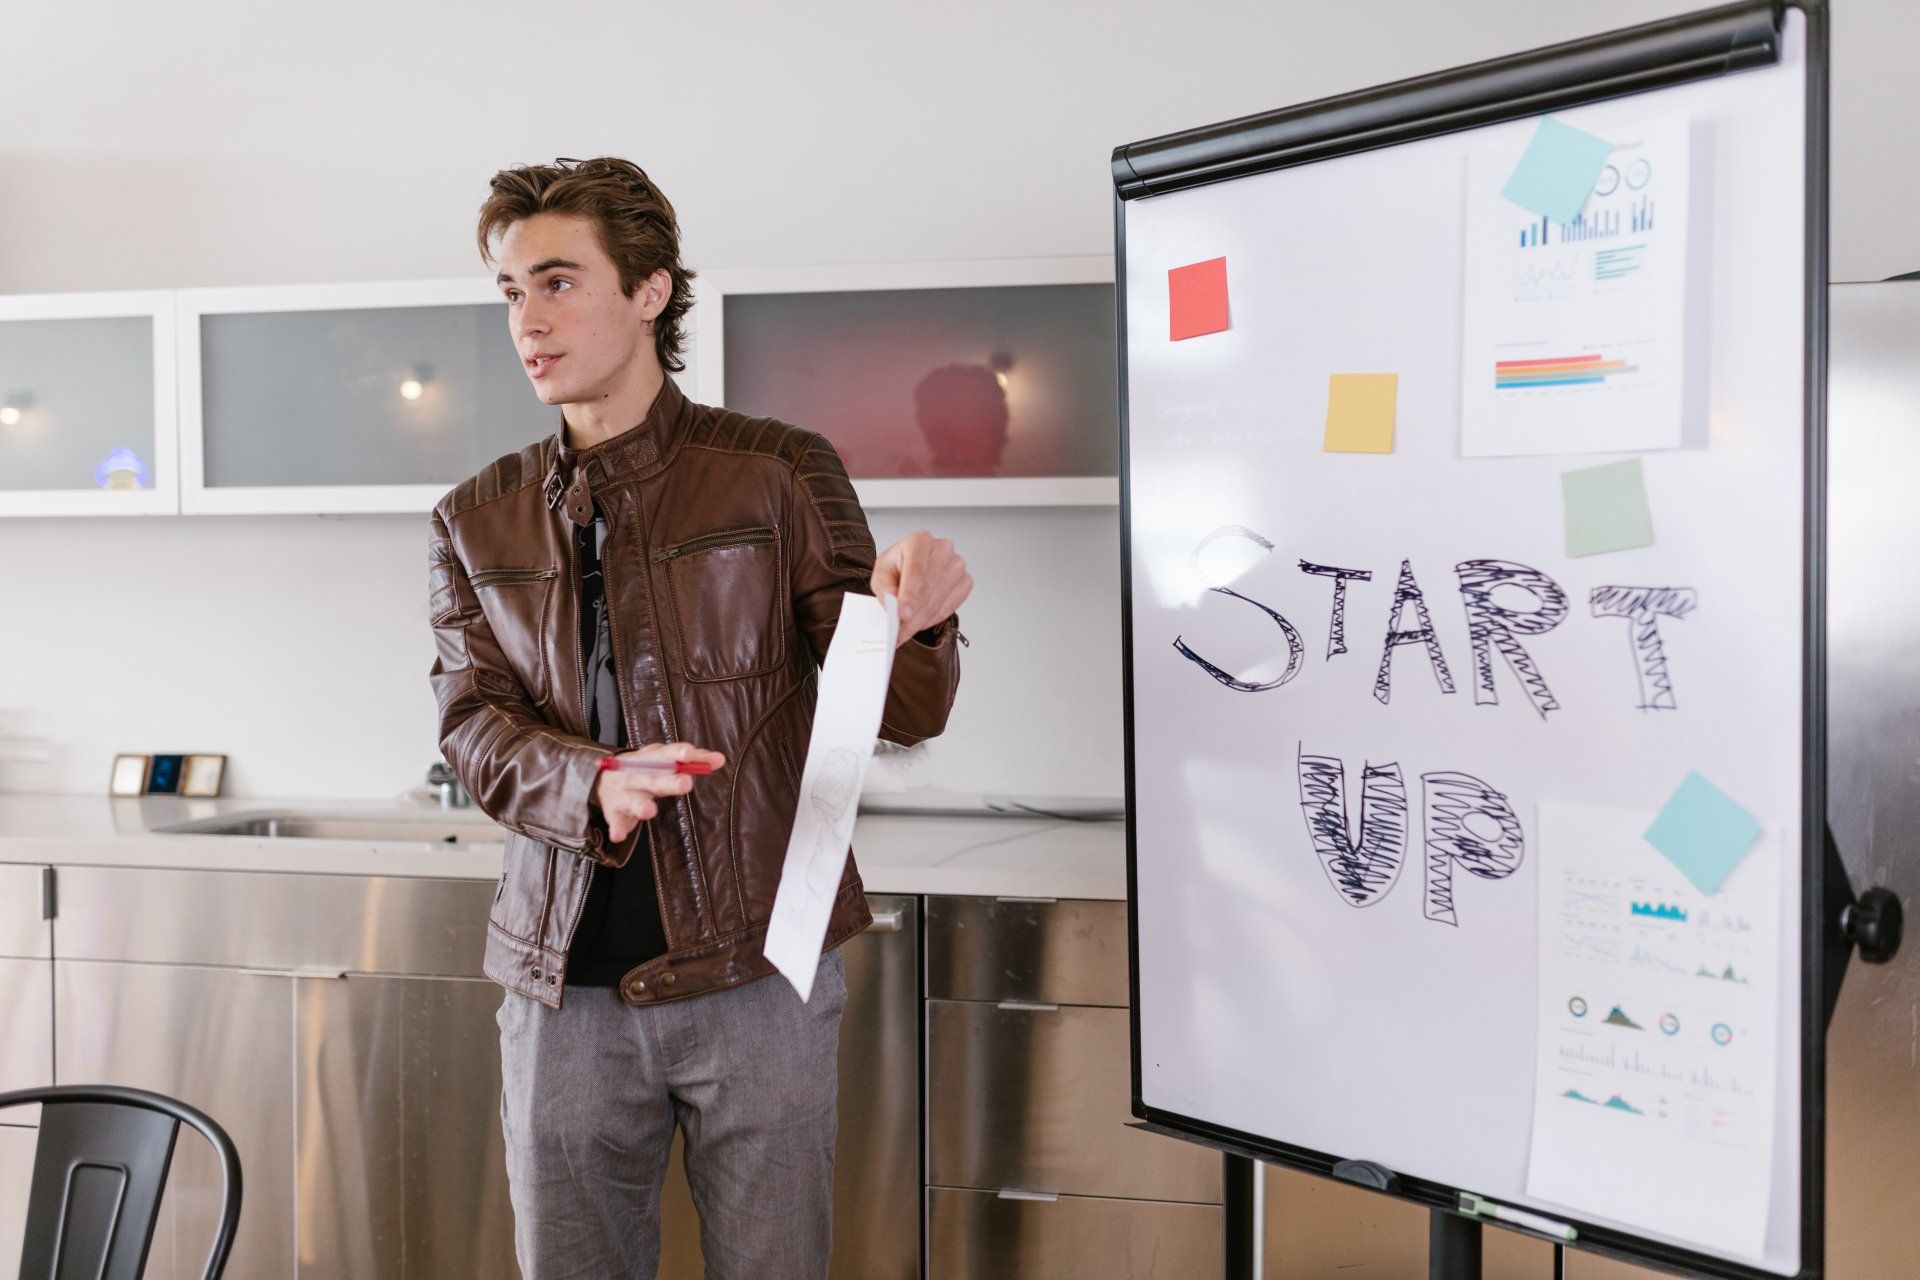 A man is giving a presentation in front of a whiteboard that says `` start up ''.